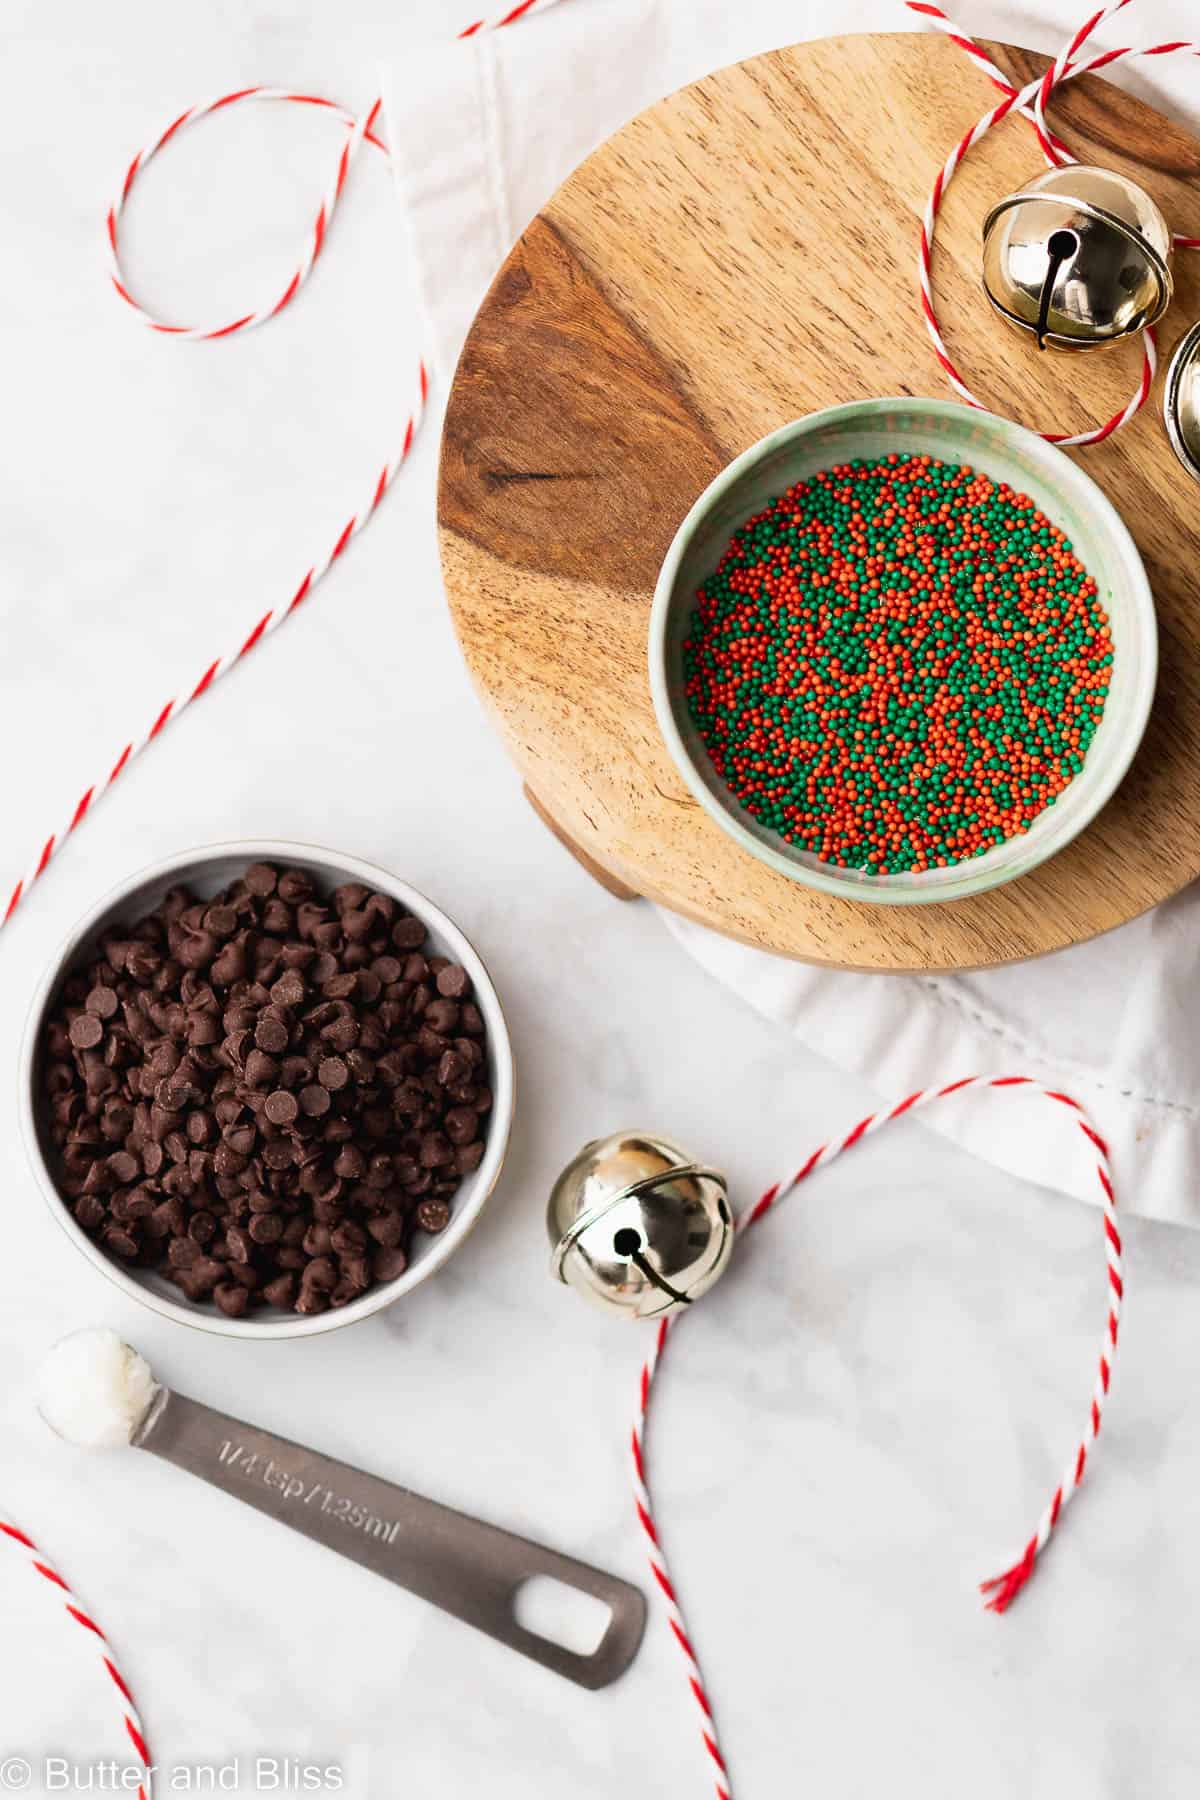 Bowls of sprinkles and chocolate chips arranged on a table.